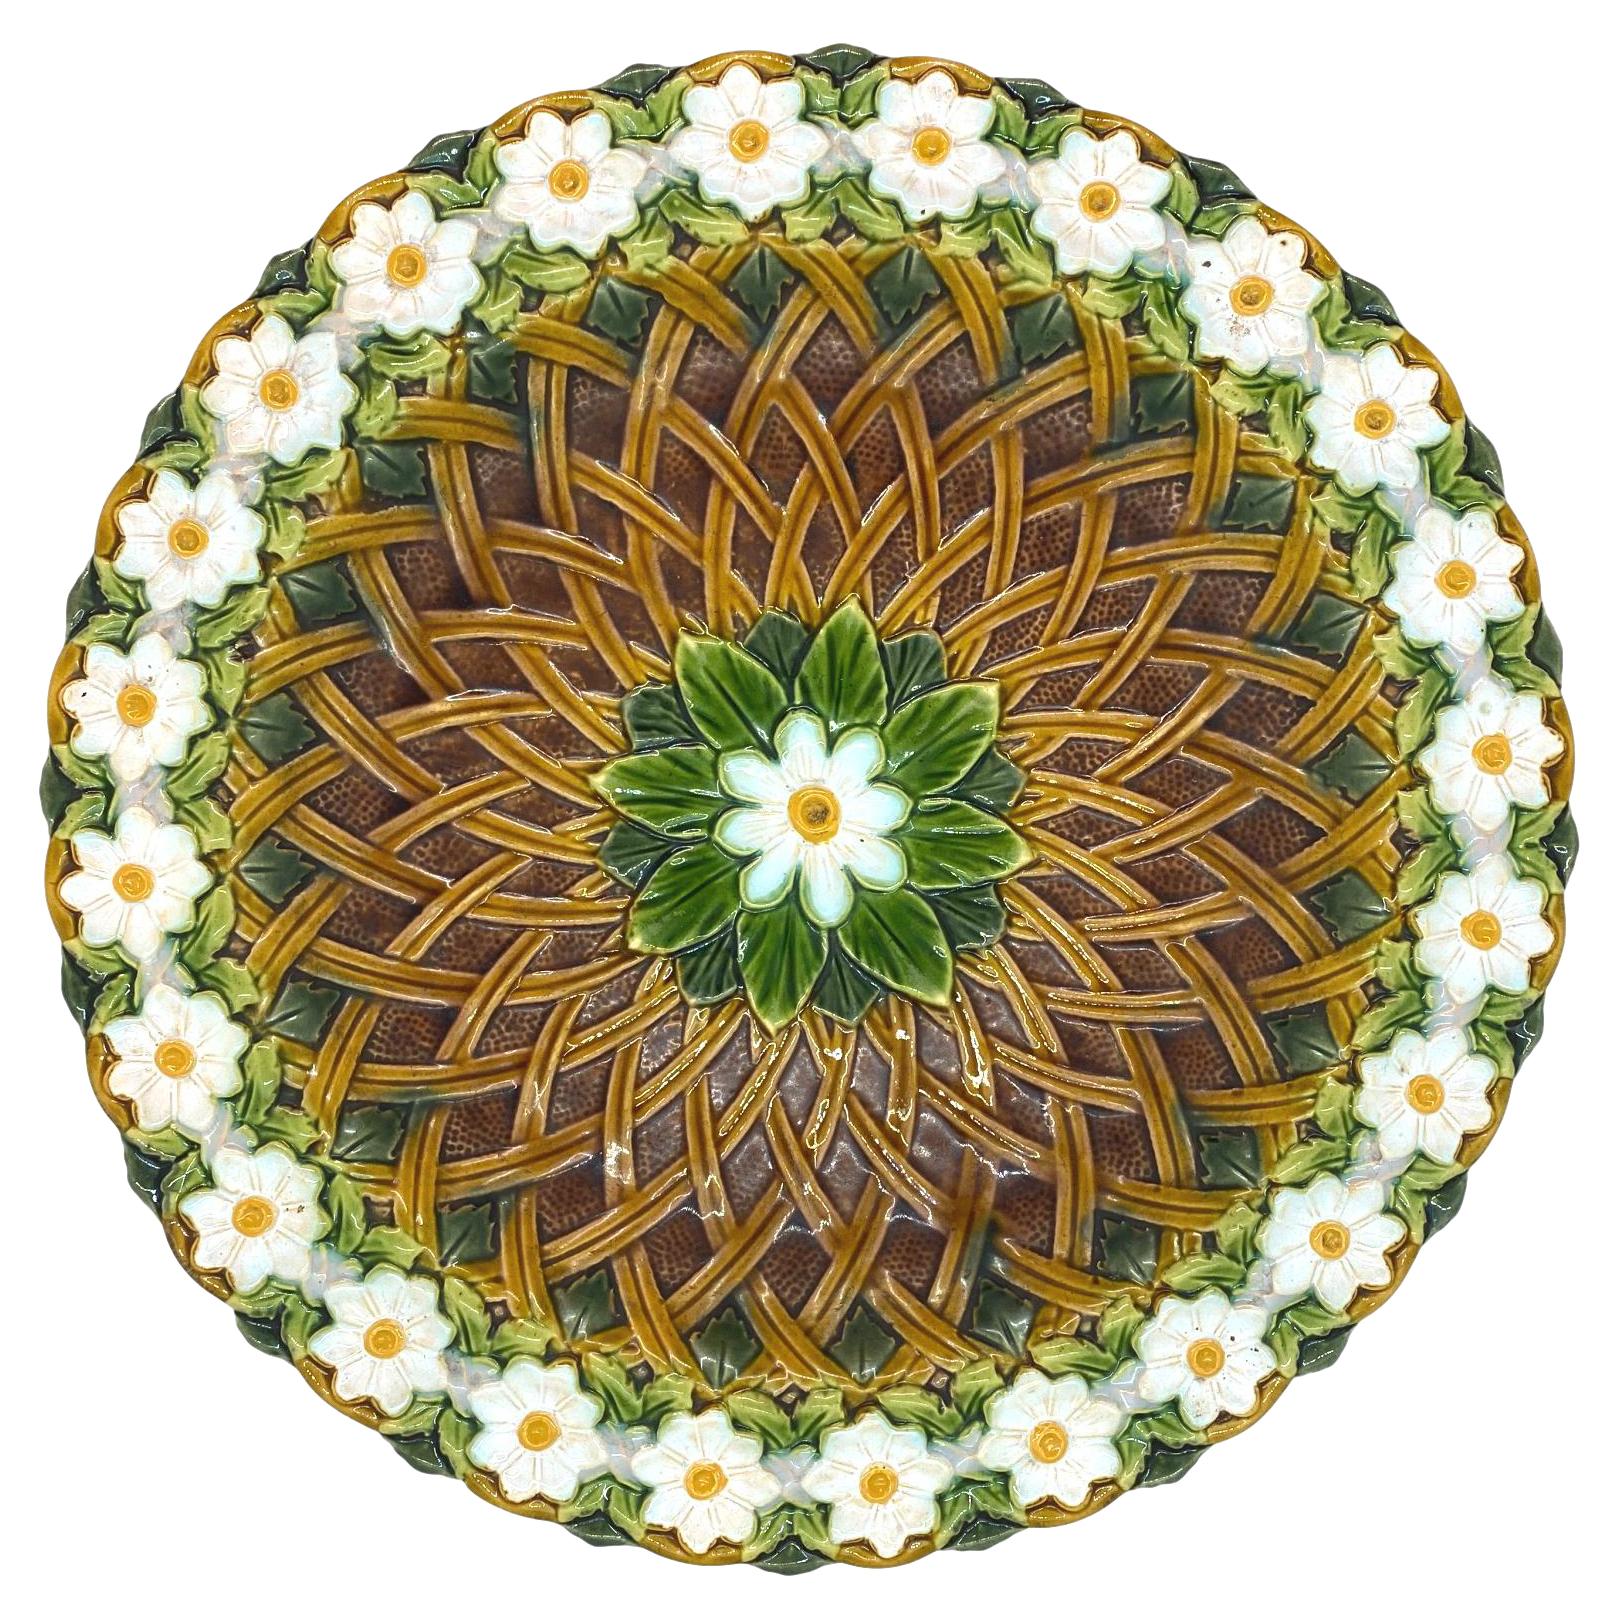 Minton Majolica Platter with Lattice Work and Daisy Chain Border, Dated 1880